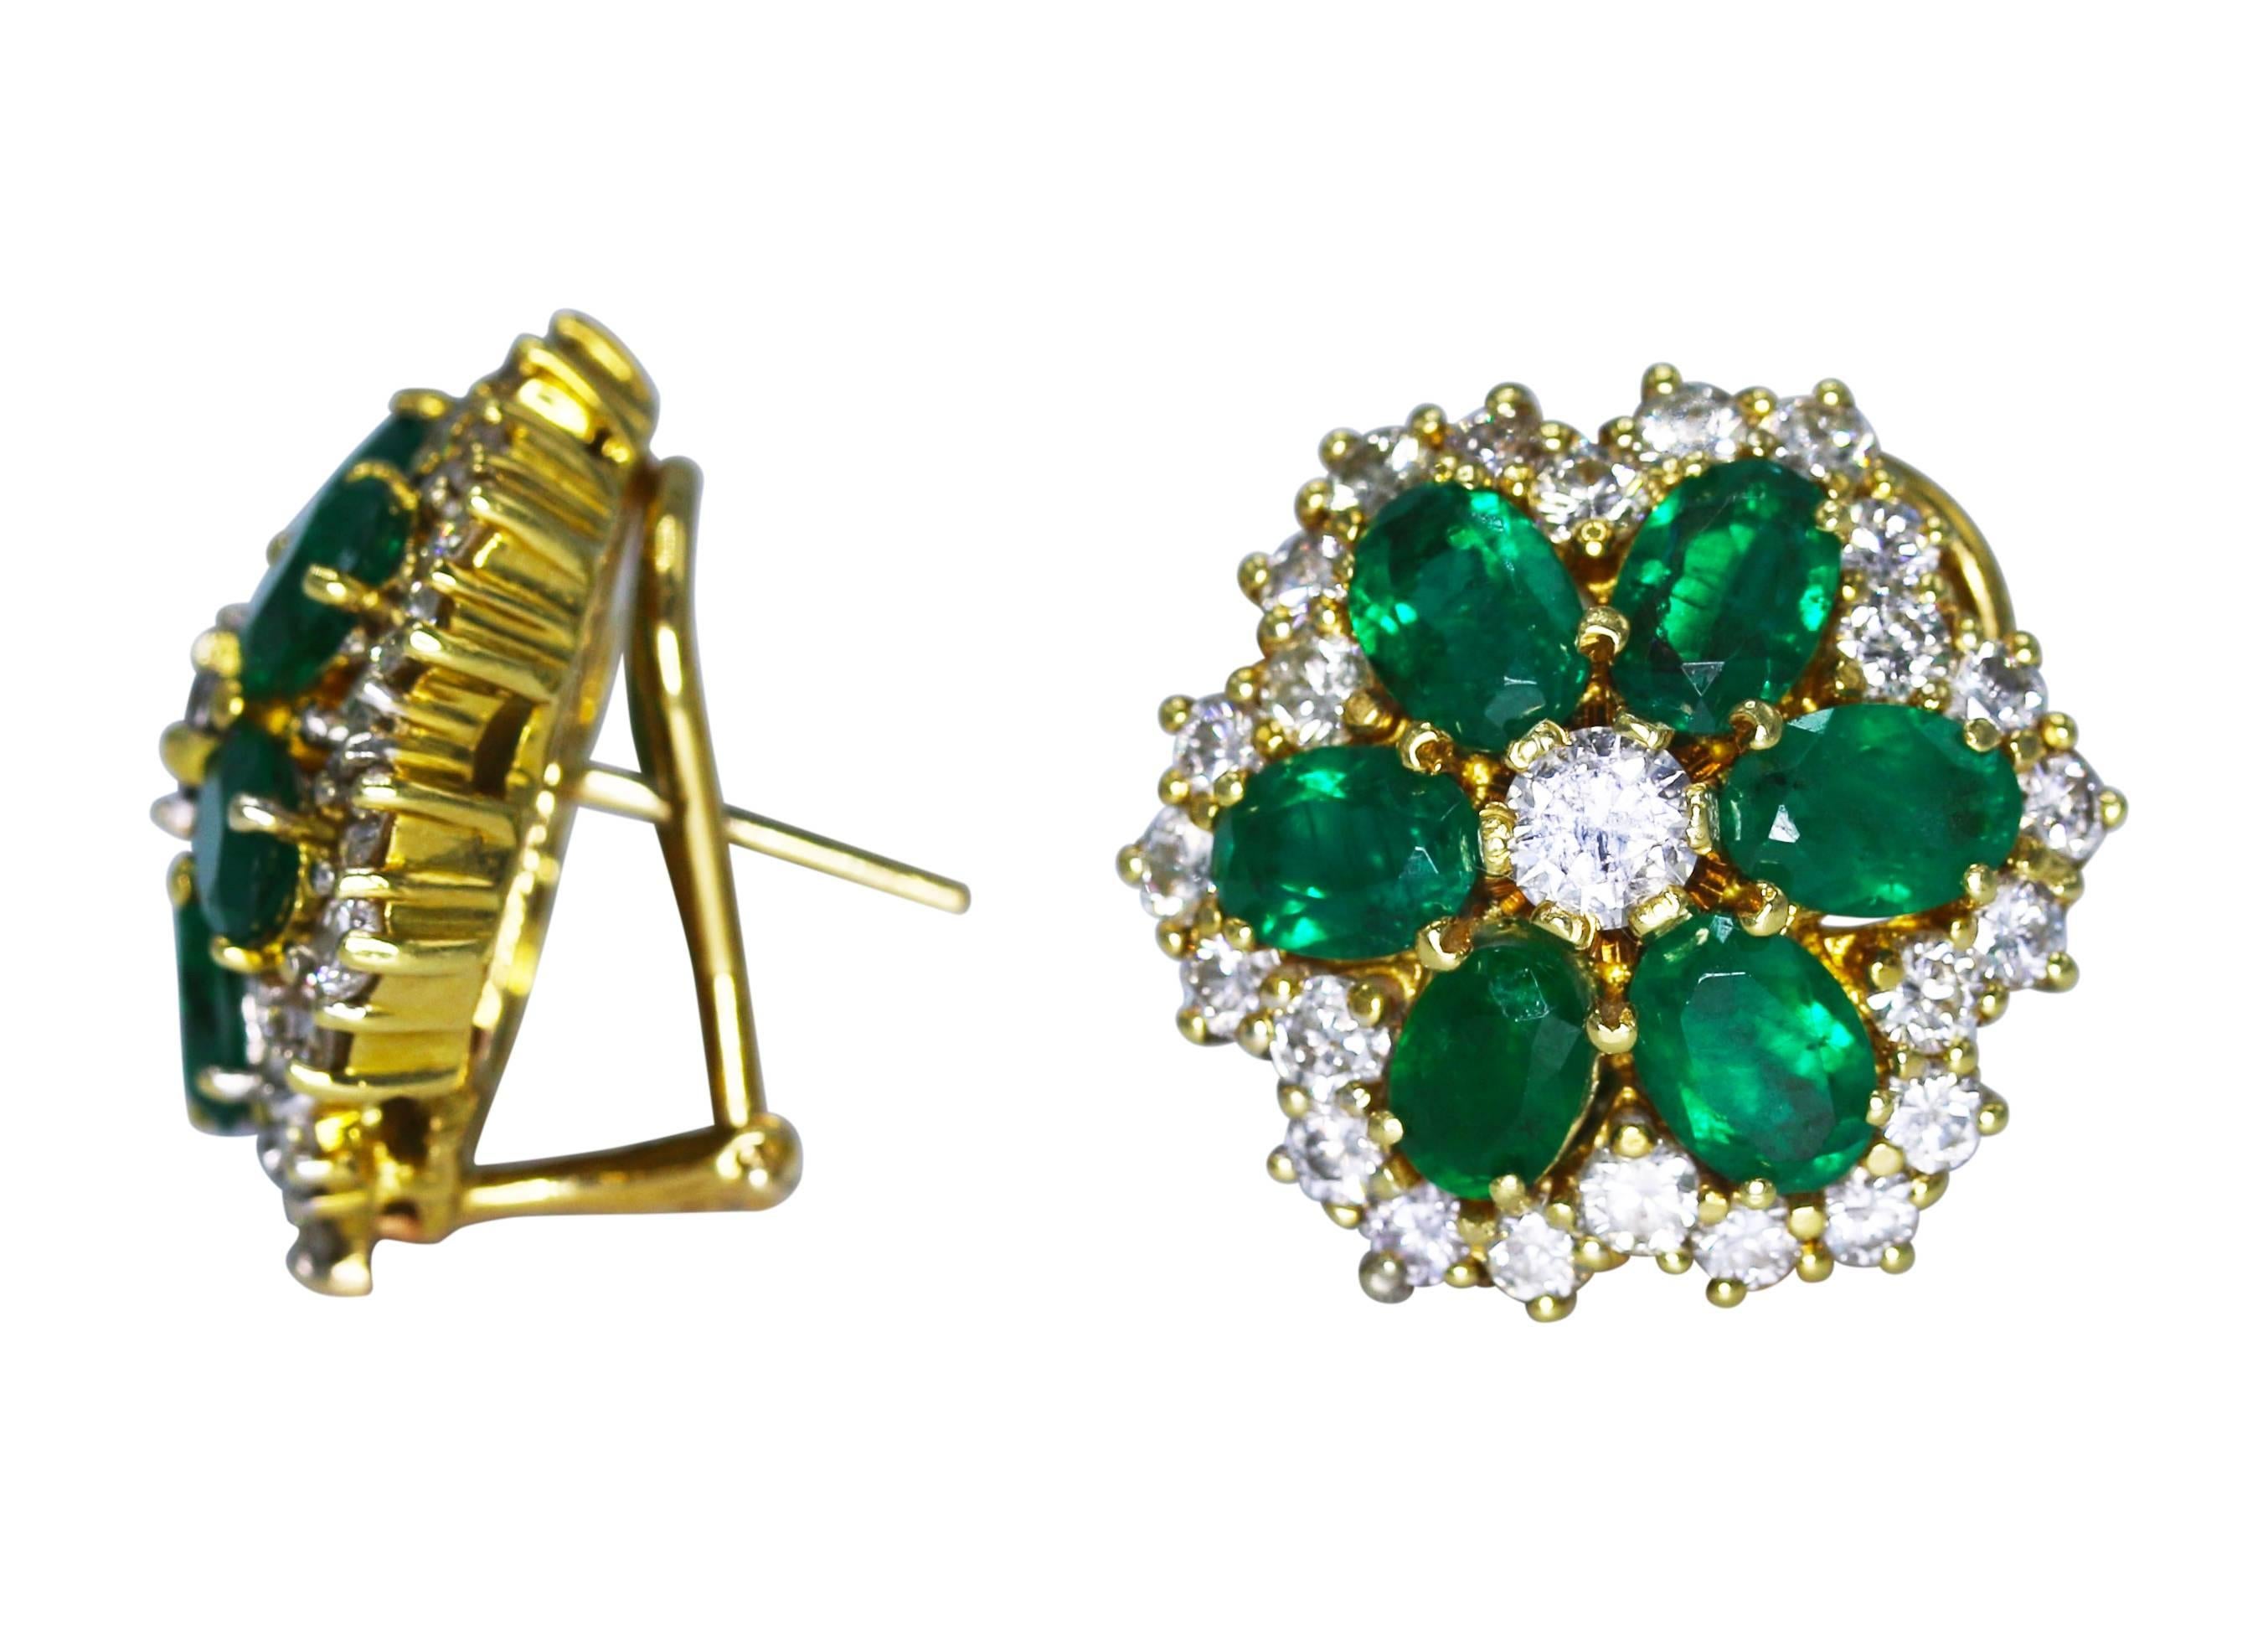 Pair of 18 karat yellow gold, emerald and diamond earclips, designed as flowerheads set with emeralds weighing approximately 7.00 carats, accented by diamonds weighing approximately 3.60 carats, gross weight 18.5 grams, measuring 7/8 by 7/8 inch.